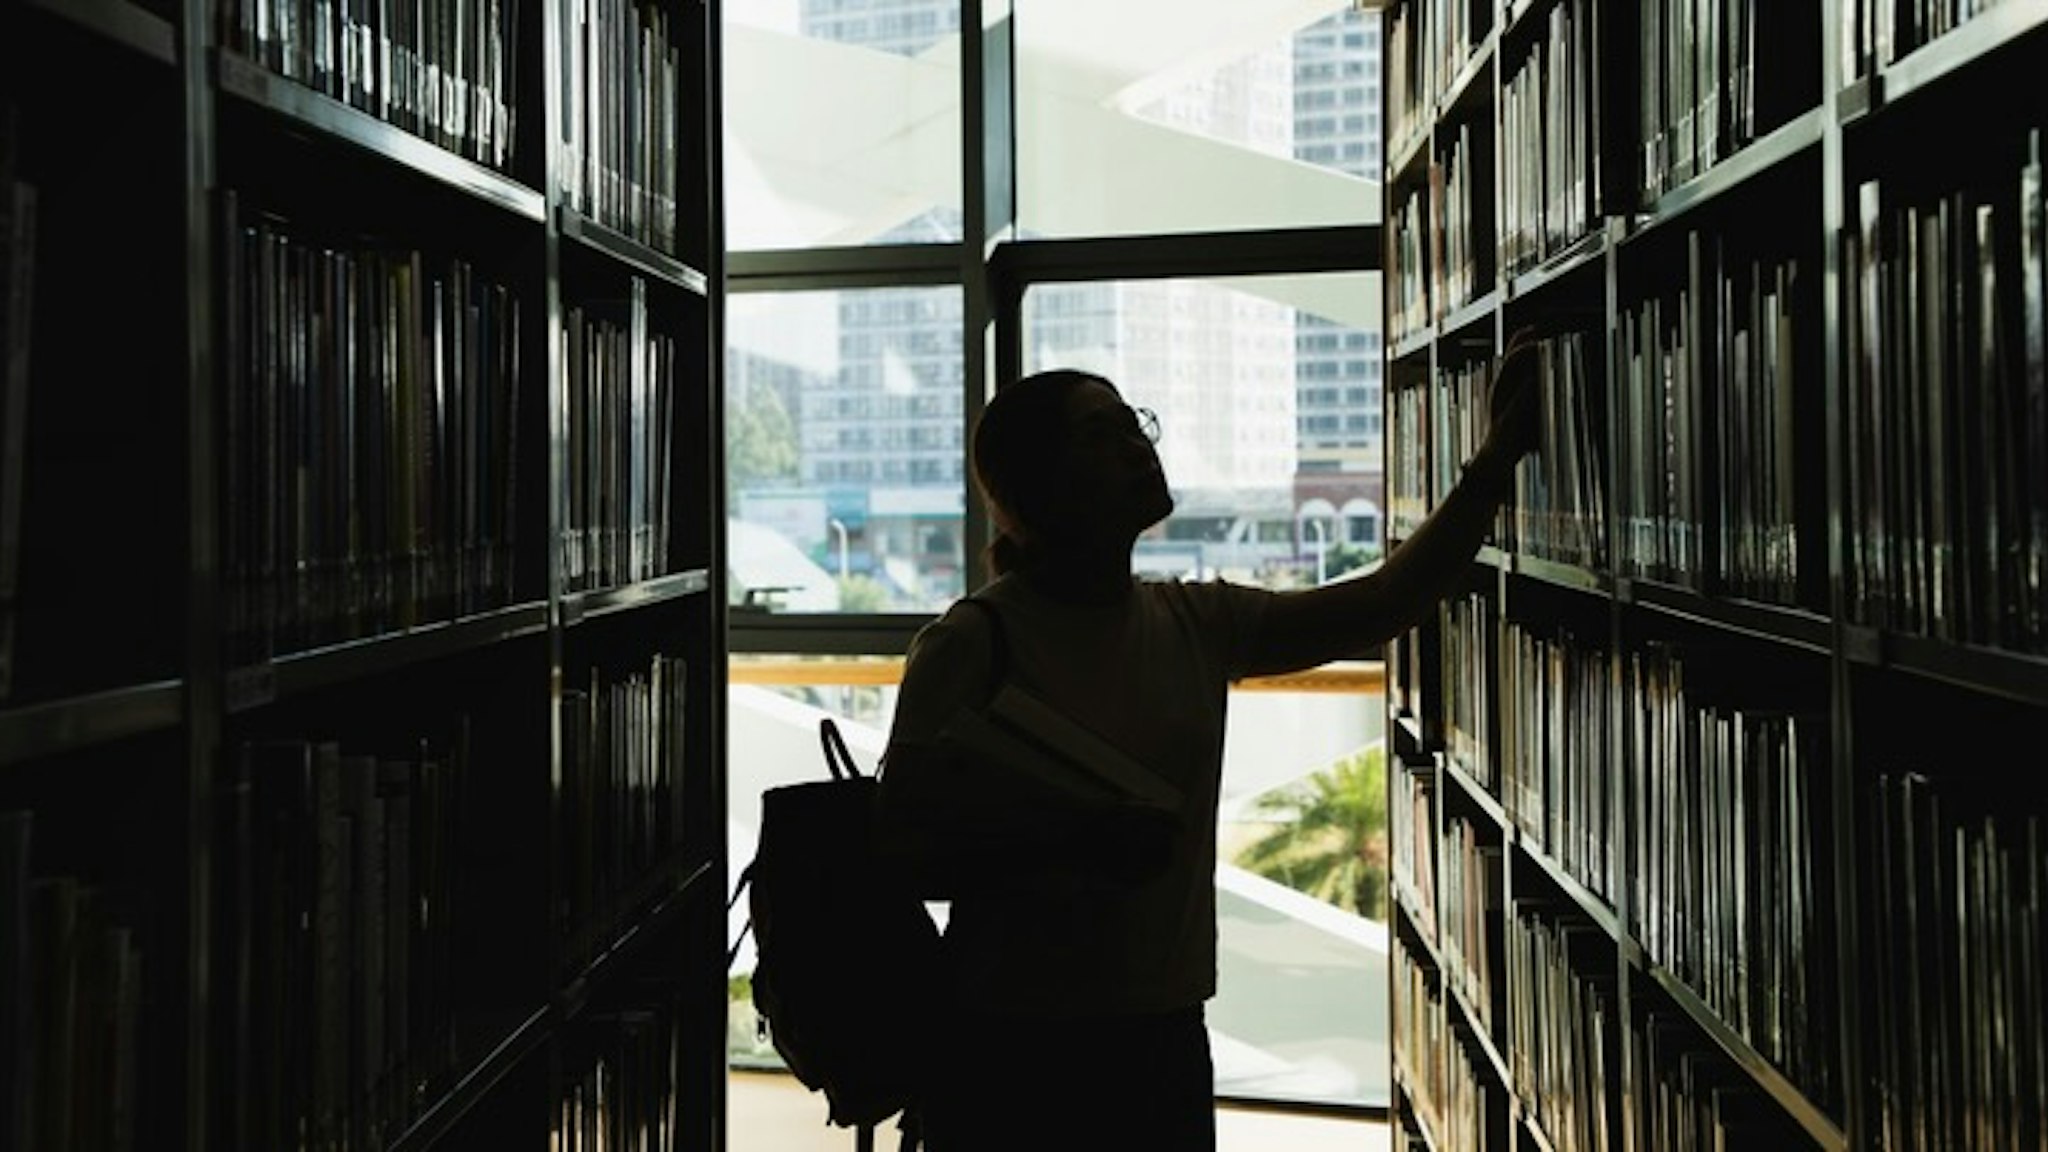 female student in silhouette looking at the books from the bookshelf - stock photo female student in silhouette looking at the books from the bookshelf Kilito Chan via Getty Images